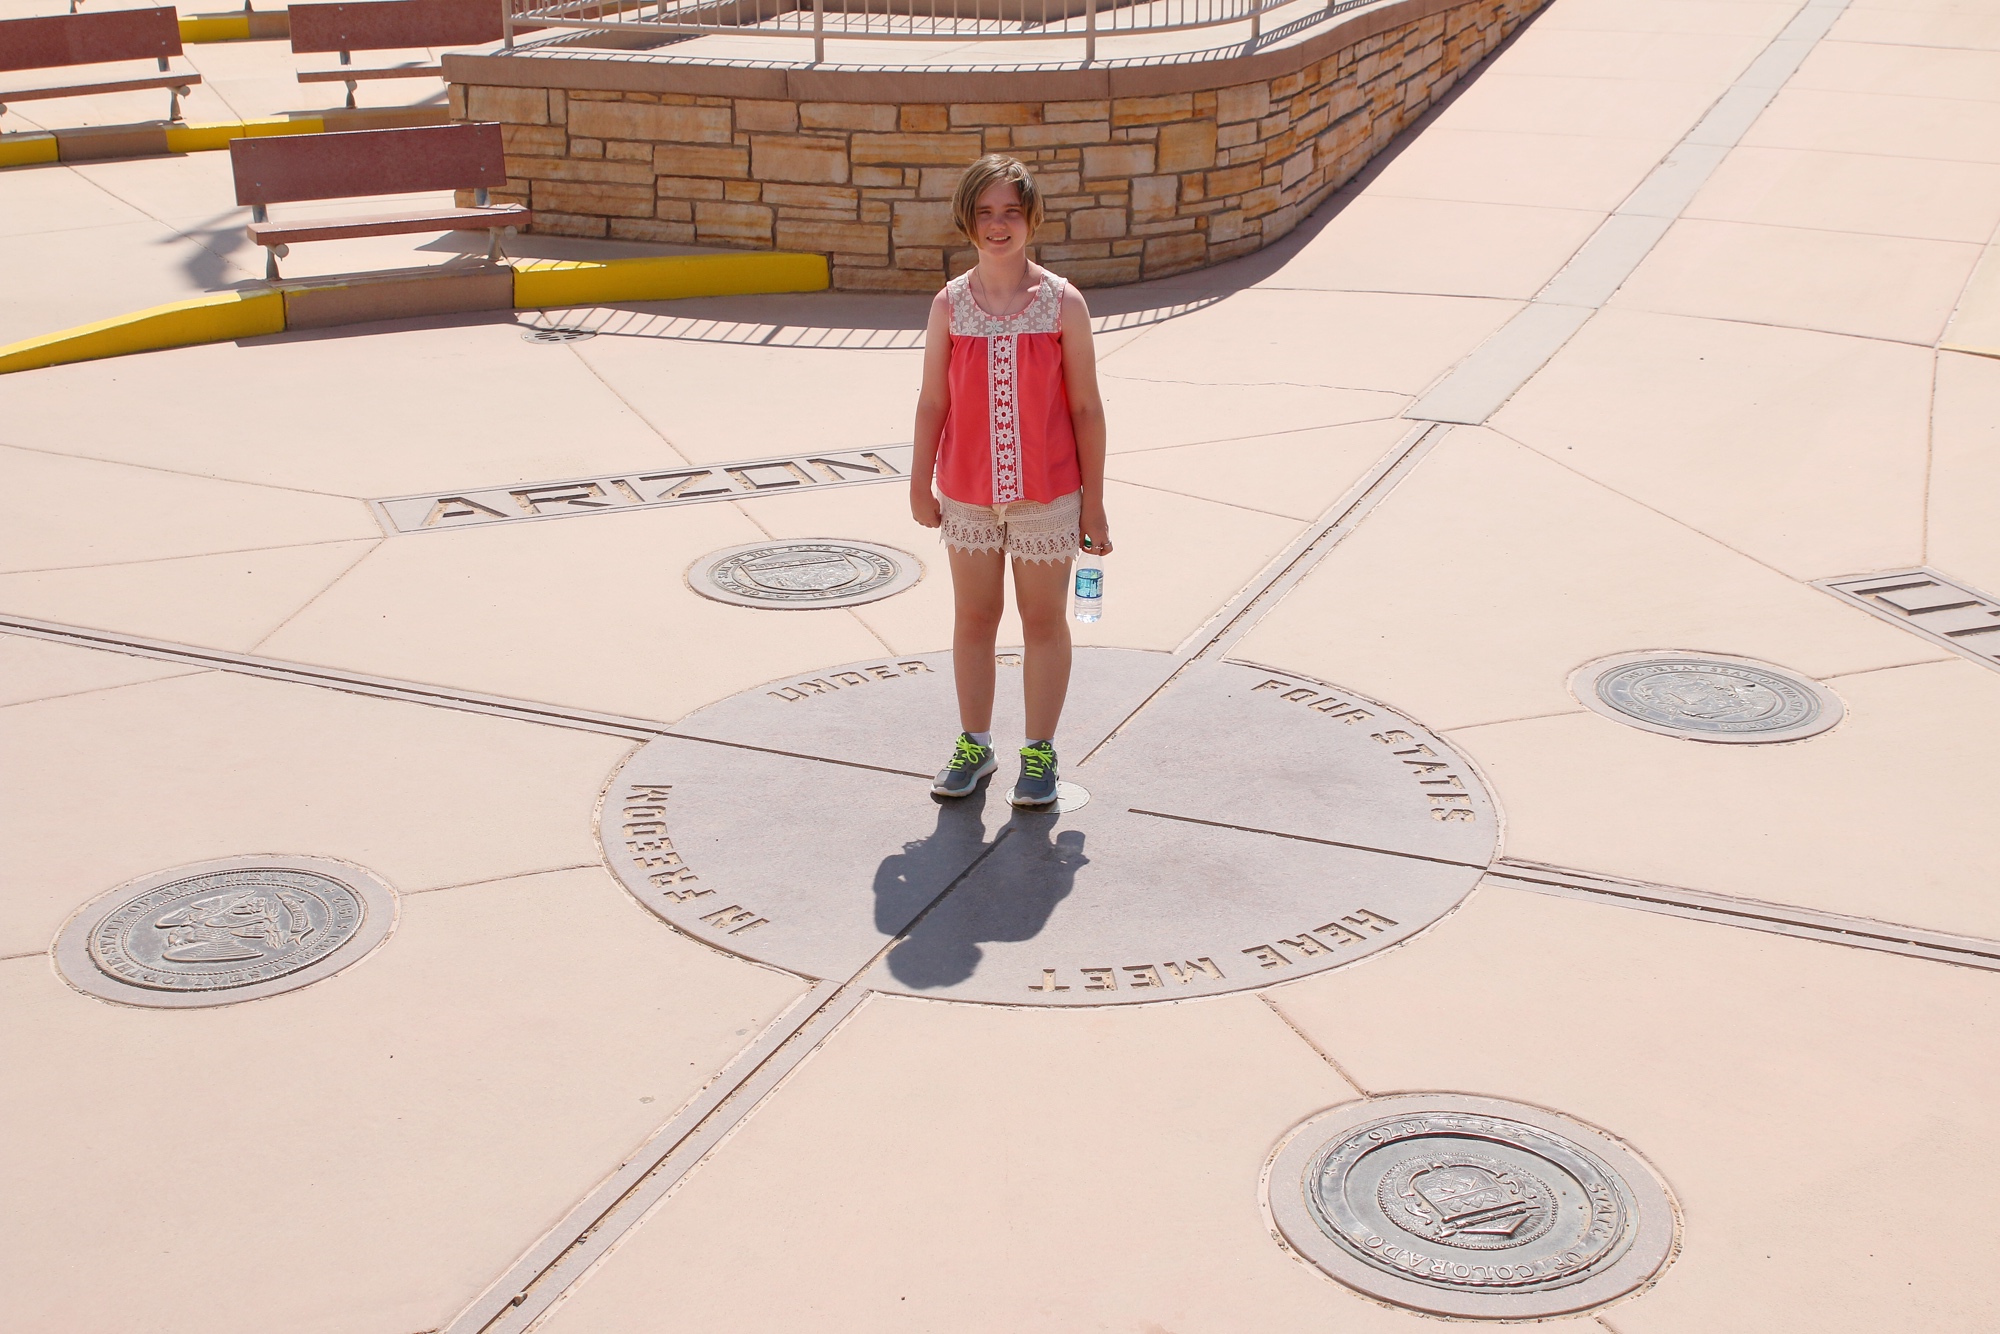 Gabby at four corners monument